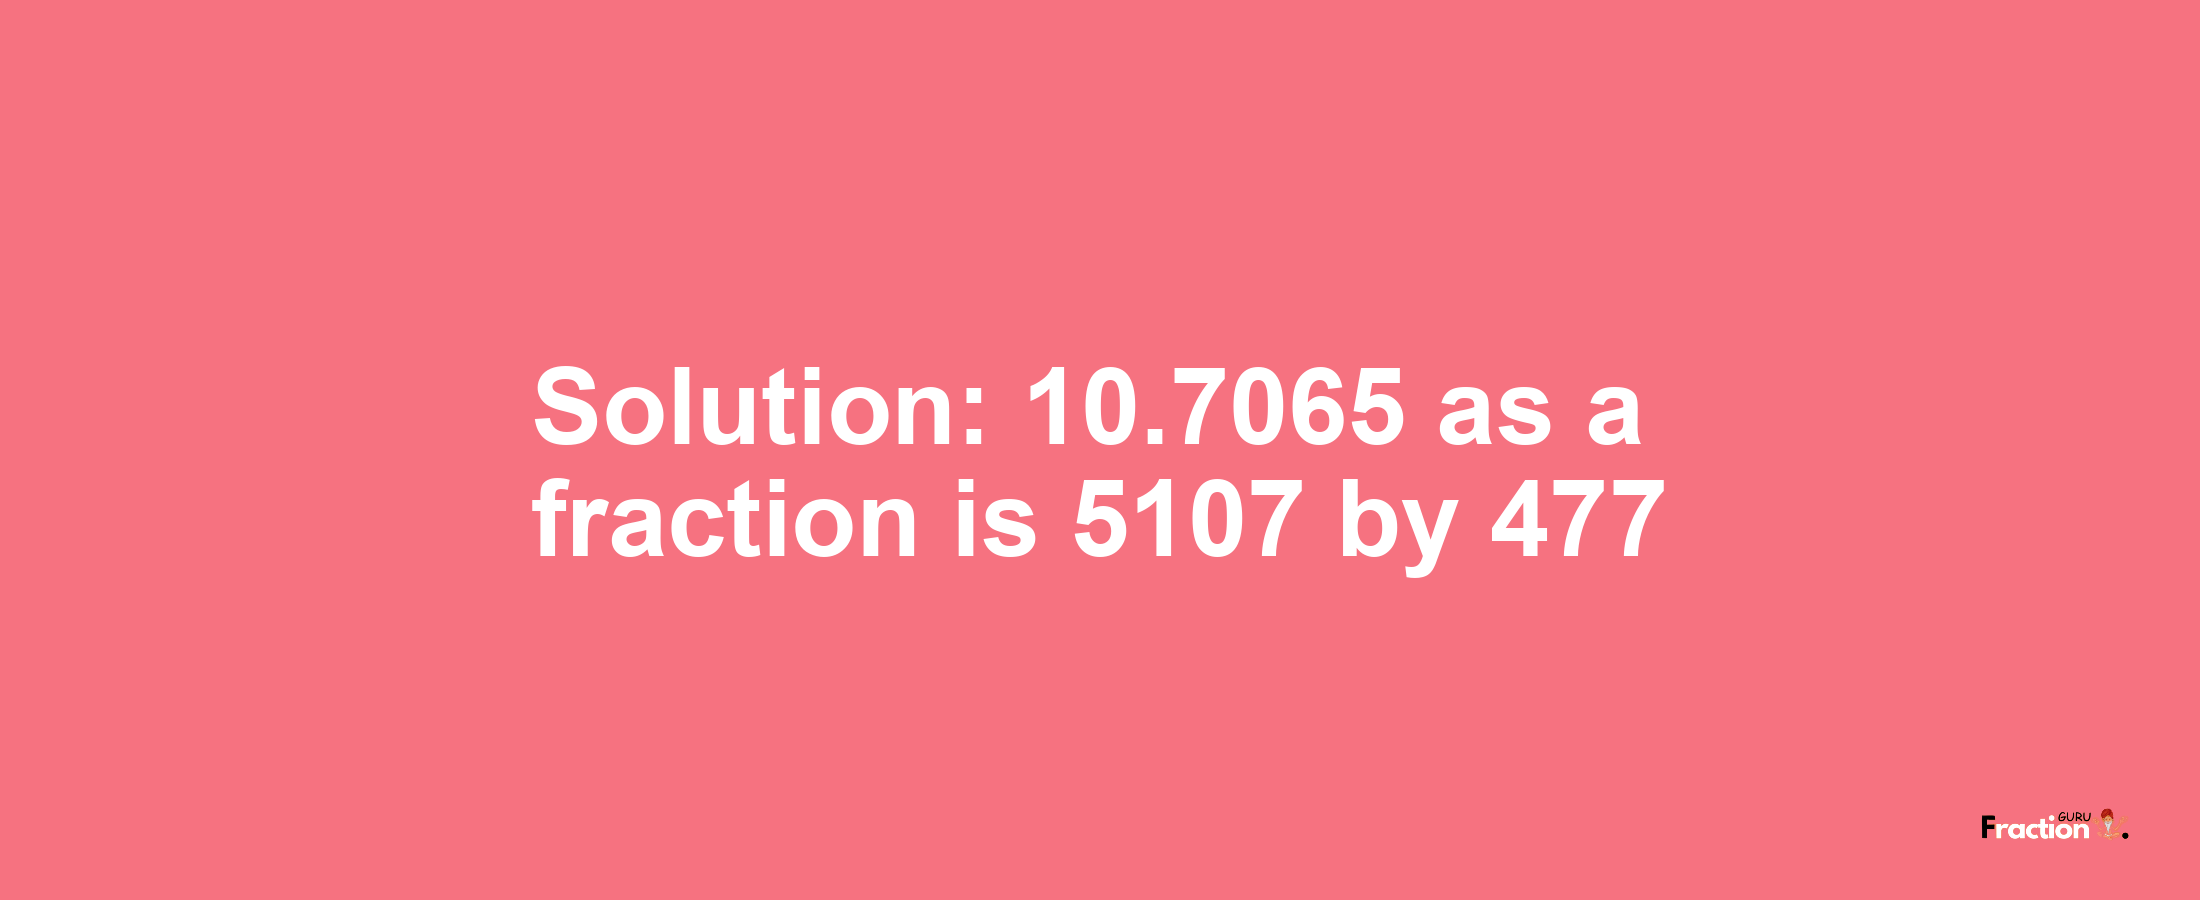 Solution:10.7065 as a fraction is 5107/477